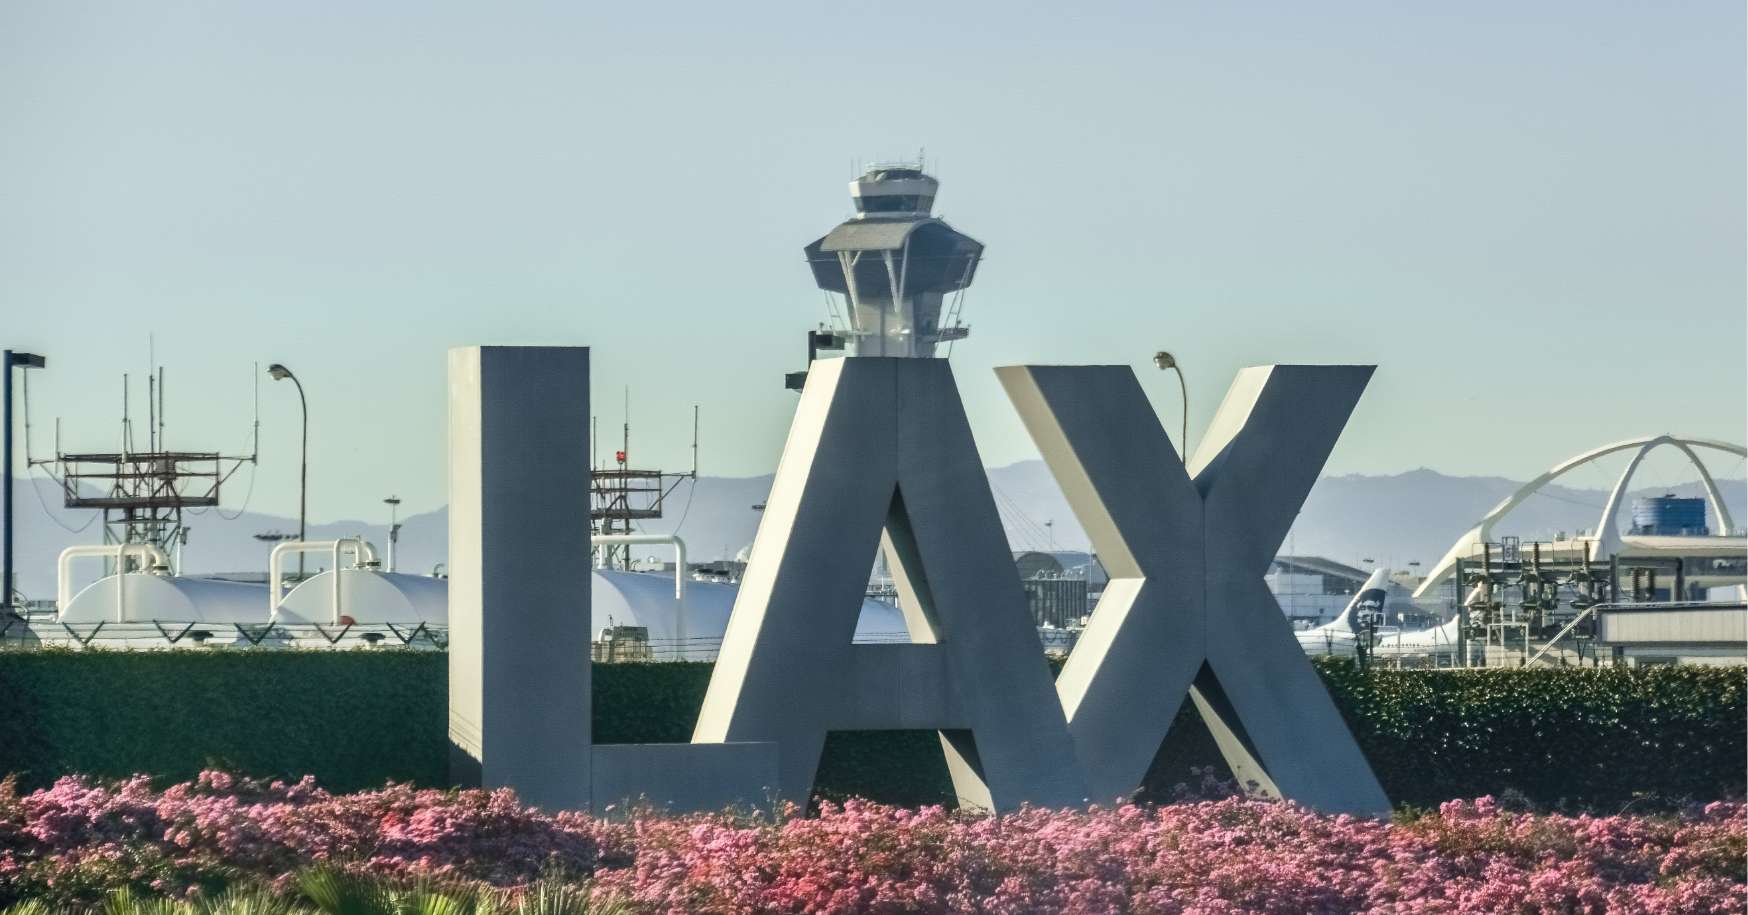 Lax Standing Sign